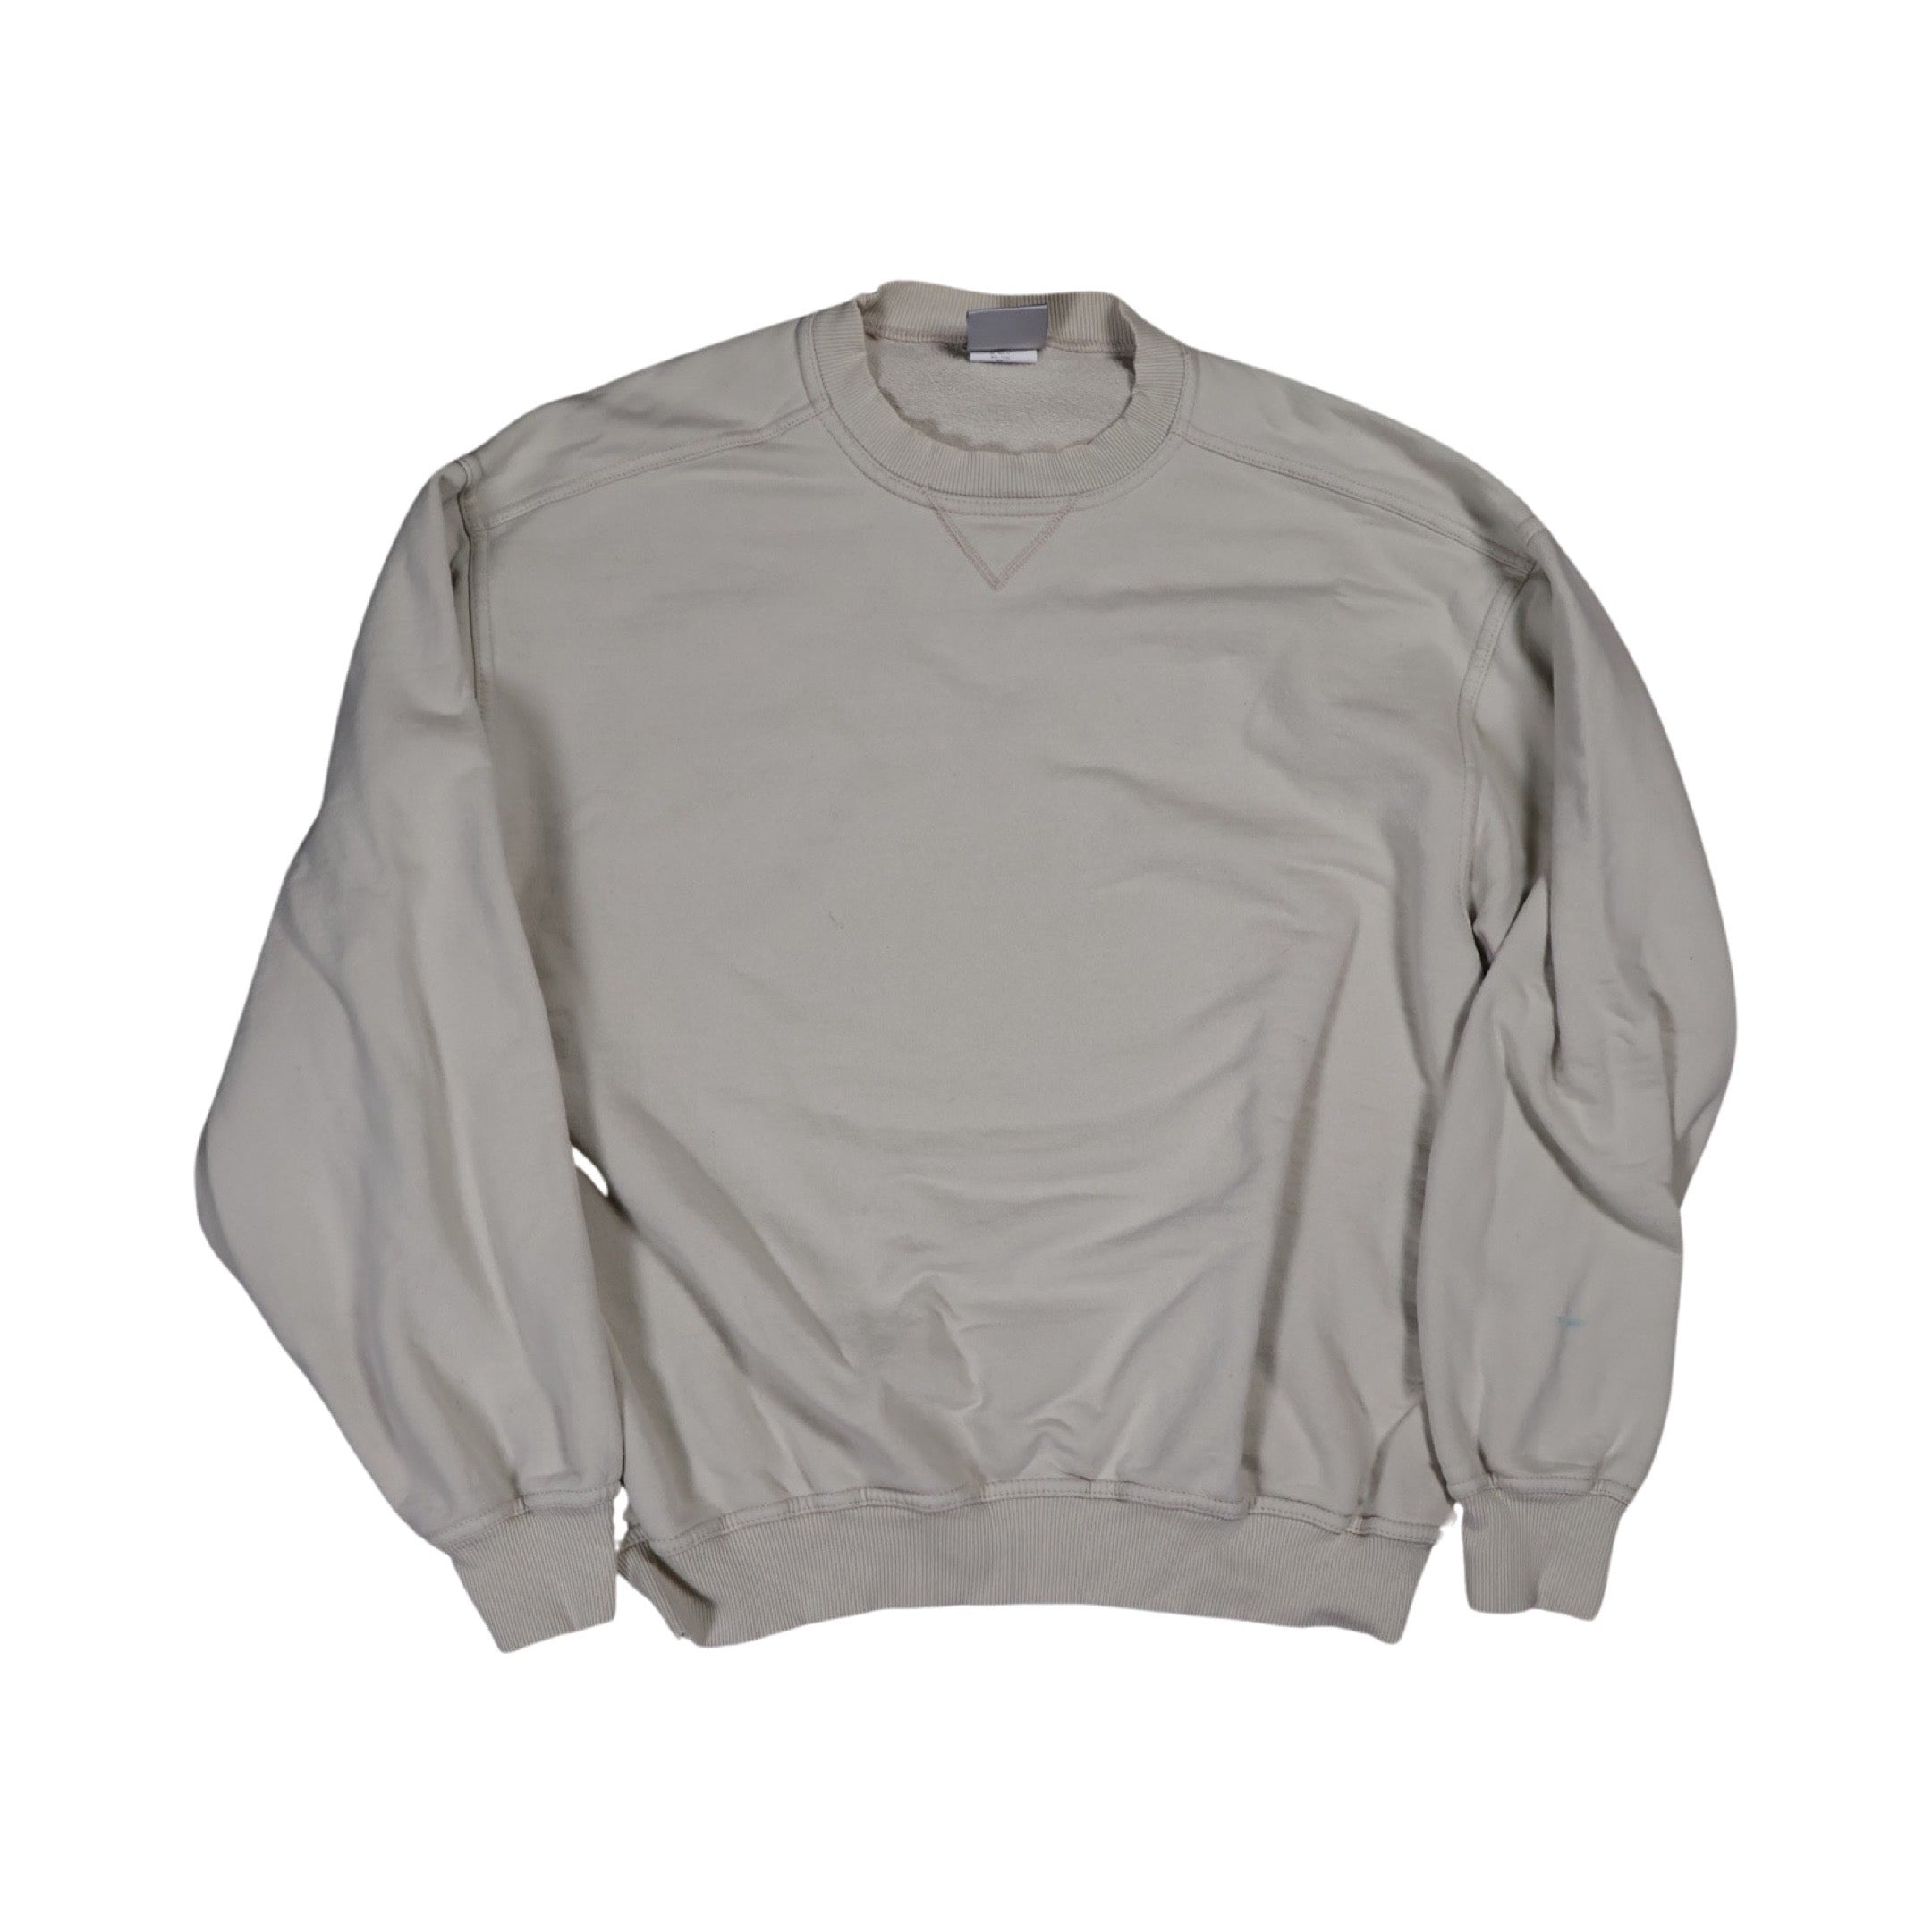 Tan 90s Sweater Essential (Large)